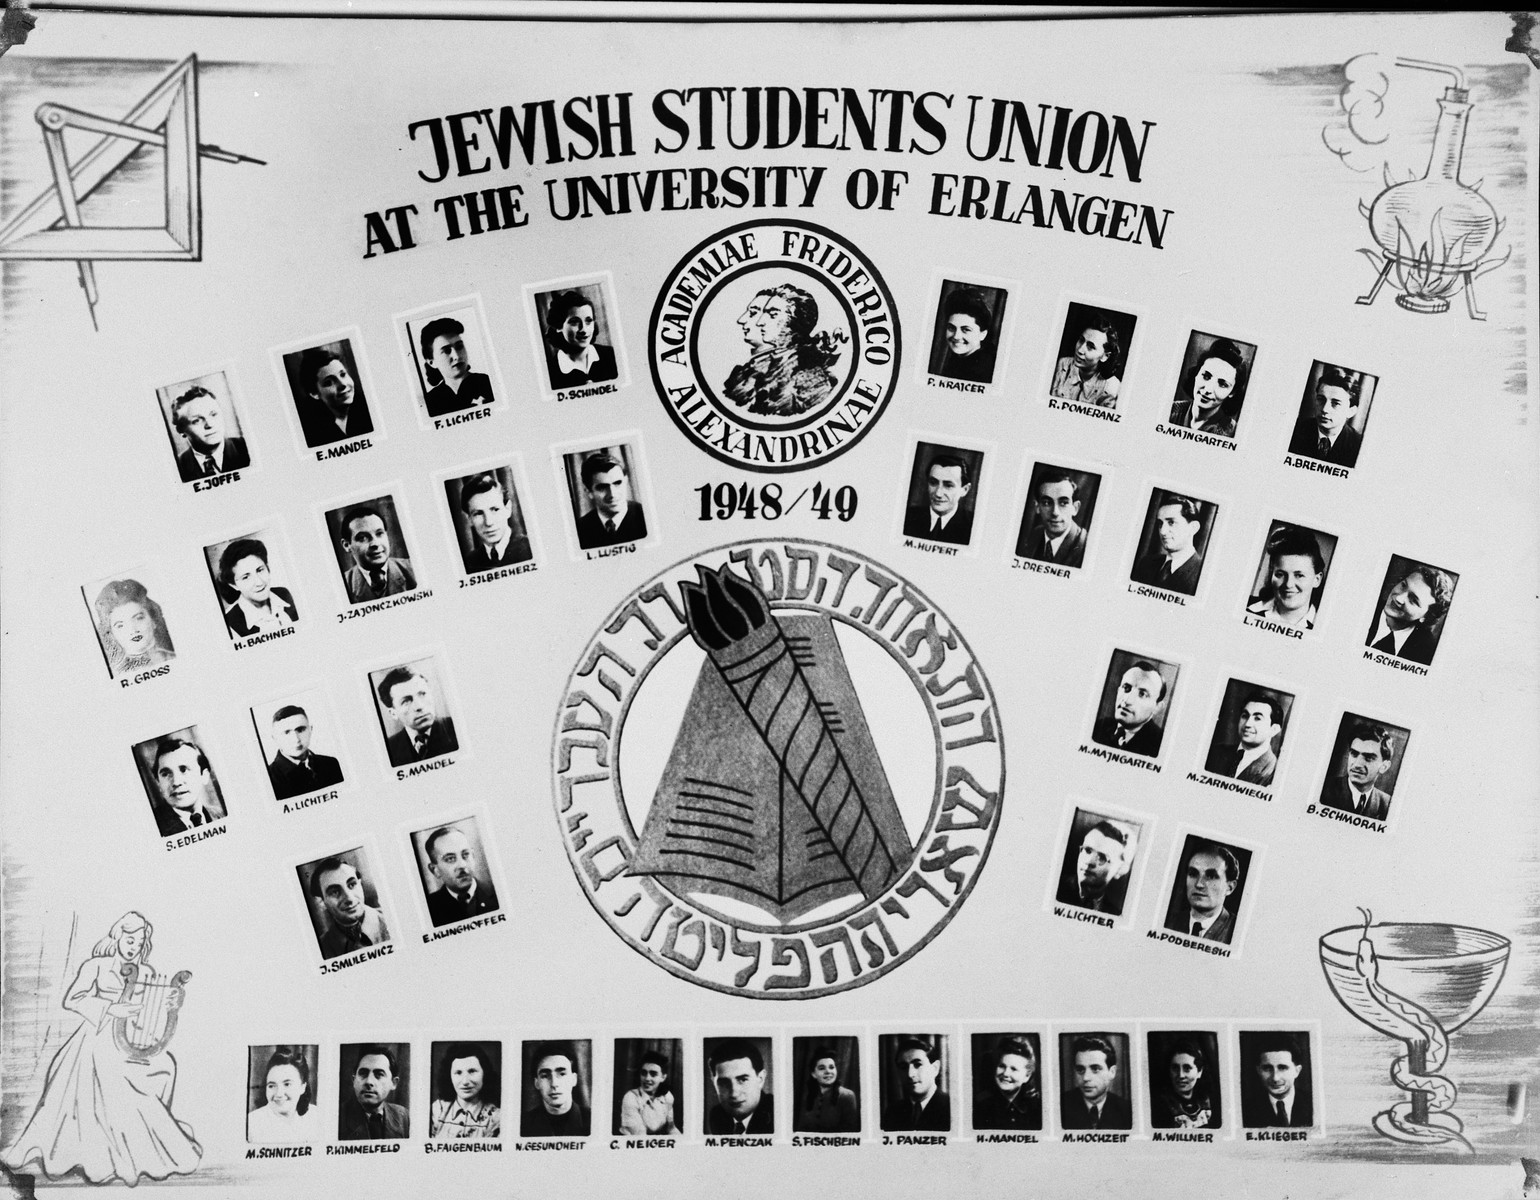 Composite photograph of the members of the Jewish Student Union at the University of Erlangen.

Among those pictured is the president of the Jewish Student Union, Paul Lustig (fourth row, fifth from the left).

Marion Hupert (4th row, fifth from the right) became a dentist as did John Silberherz (later Saunders), fourth from the left.  Renata Gross (later Smilo) fourth row, far left became an endocrinologist.  M. Hochzeit (first row, third from right) became a publisher.